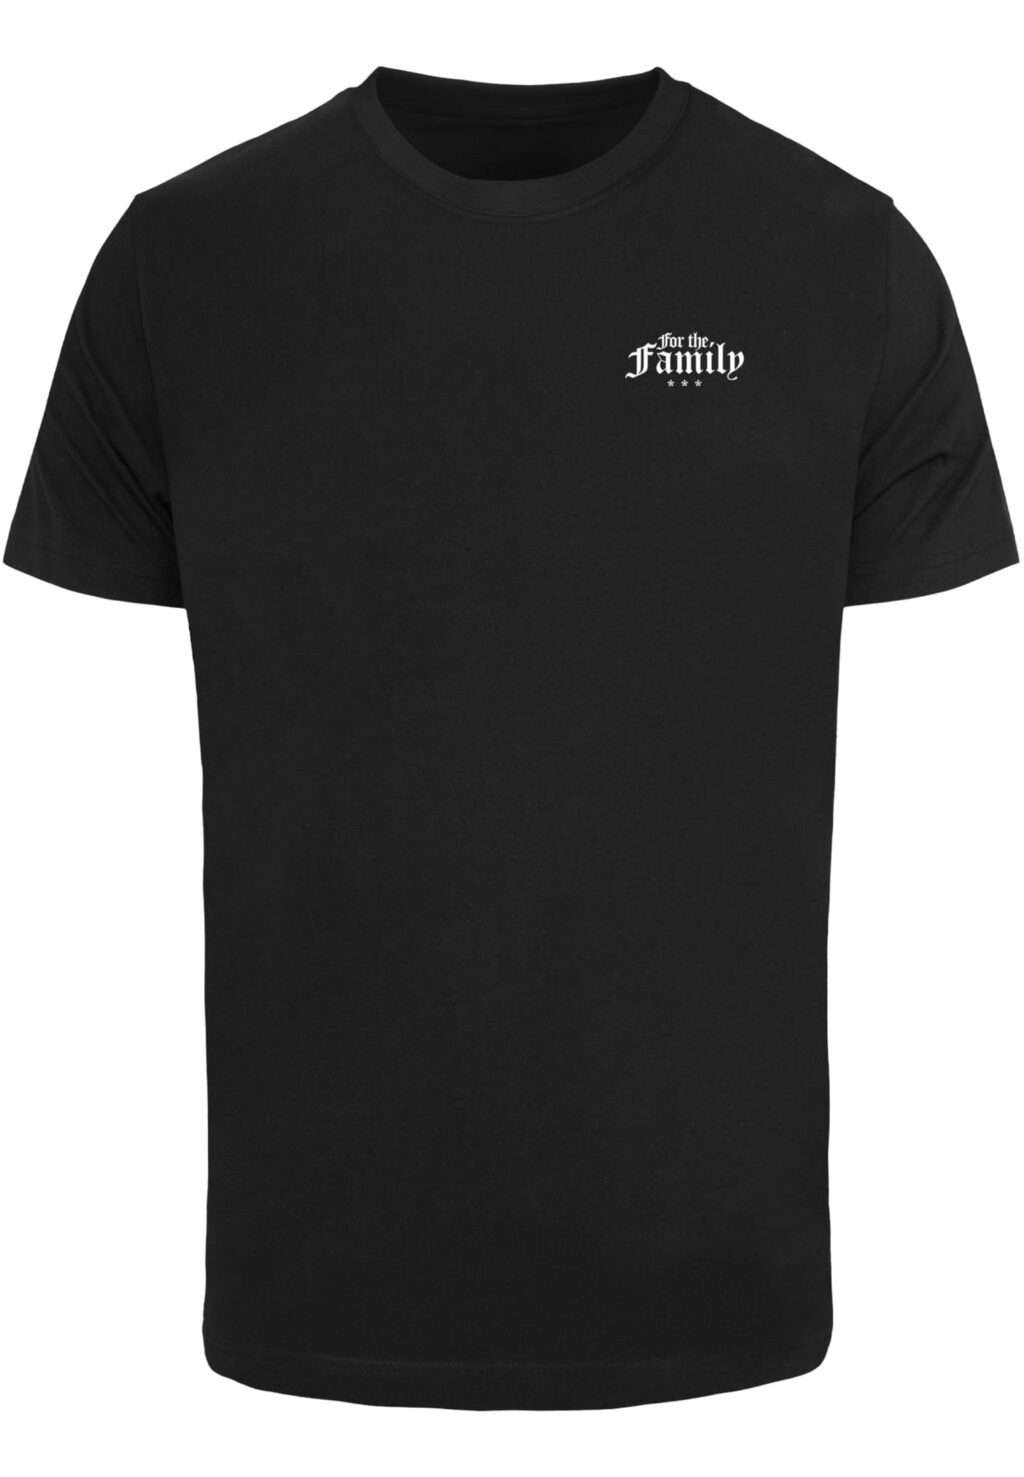 For The Family Tee black MT3105